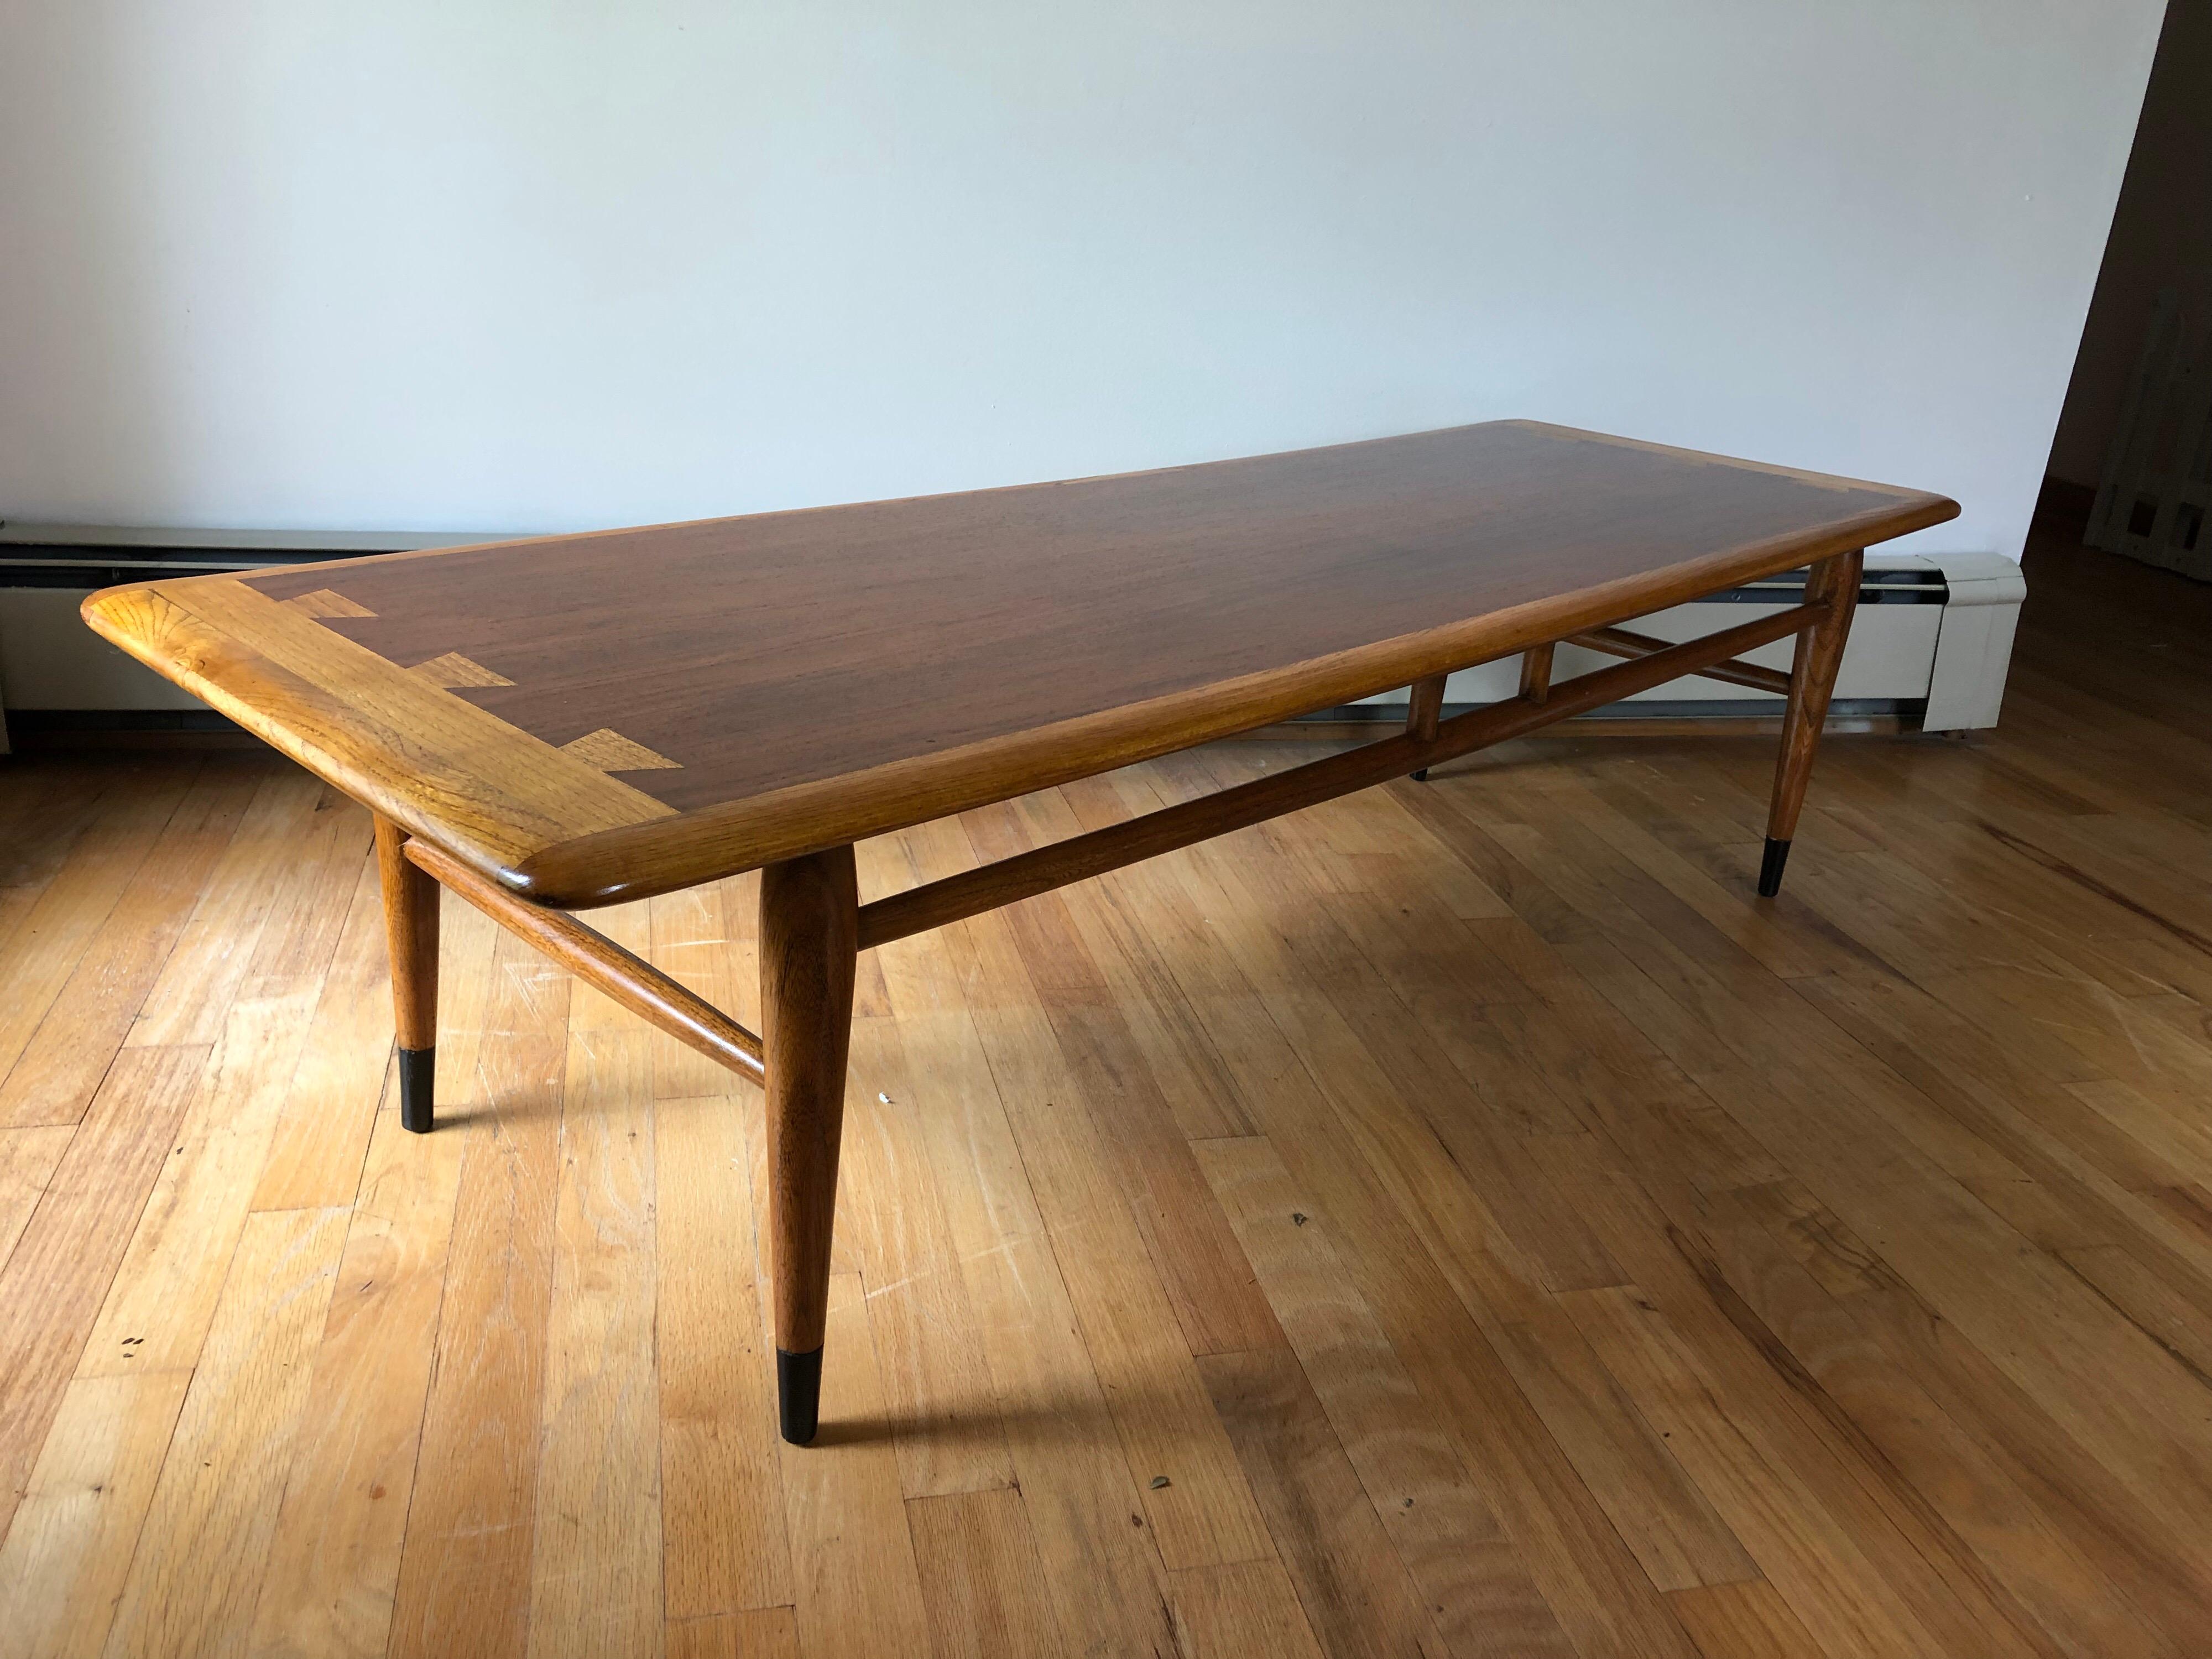 A cedar, oak, and walnut dovetail coffee table by Lane, circa 1965. Raised on turned tapering legs with ebonite feet, with turned stretchers. Burnished mark on underside, Lane Altavista, Virginia. Expertly restored.